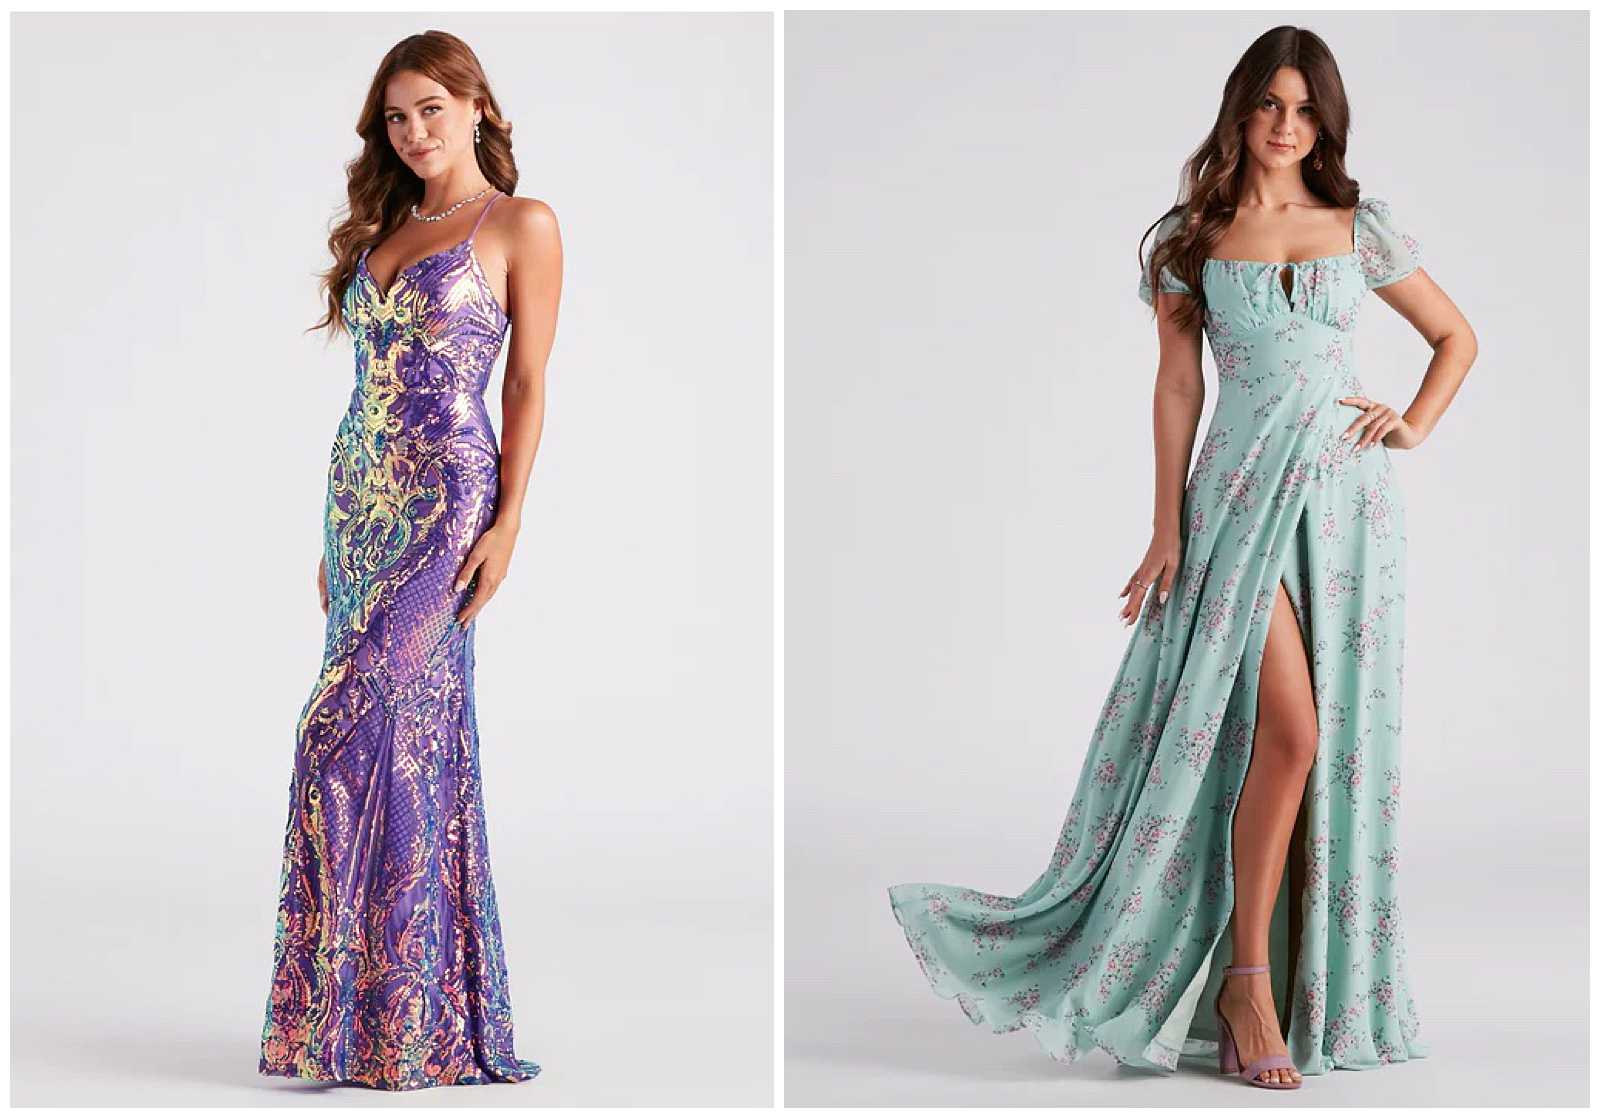 Purple iridescent prom dress and teal maxi dress with pink florals.